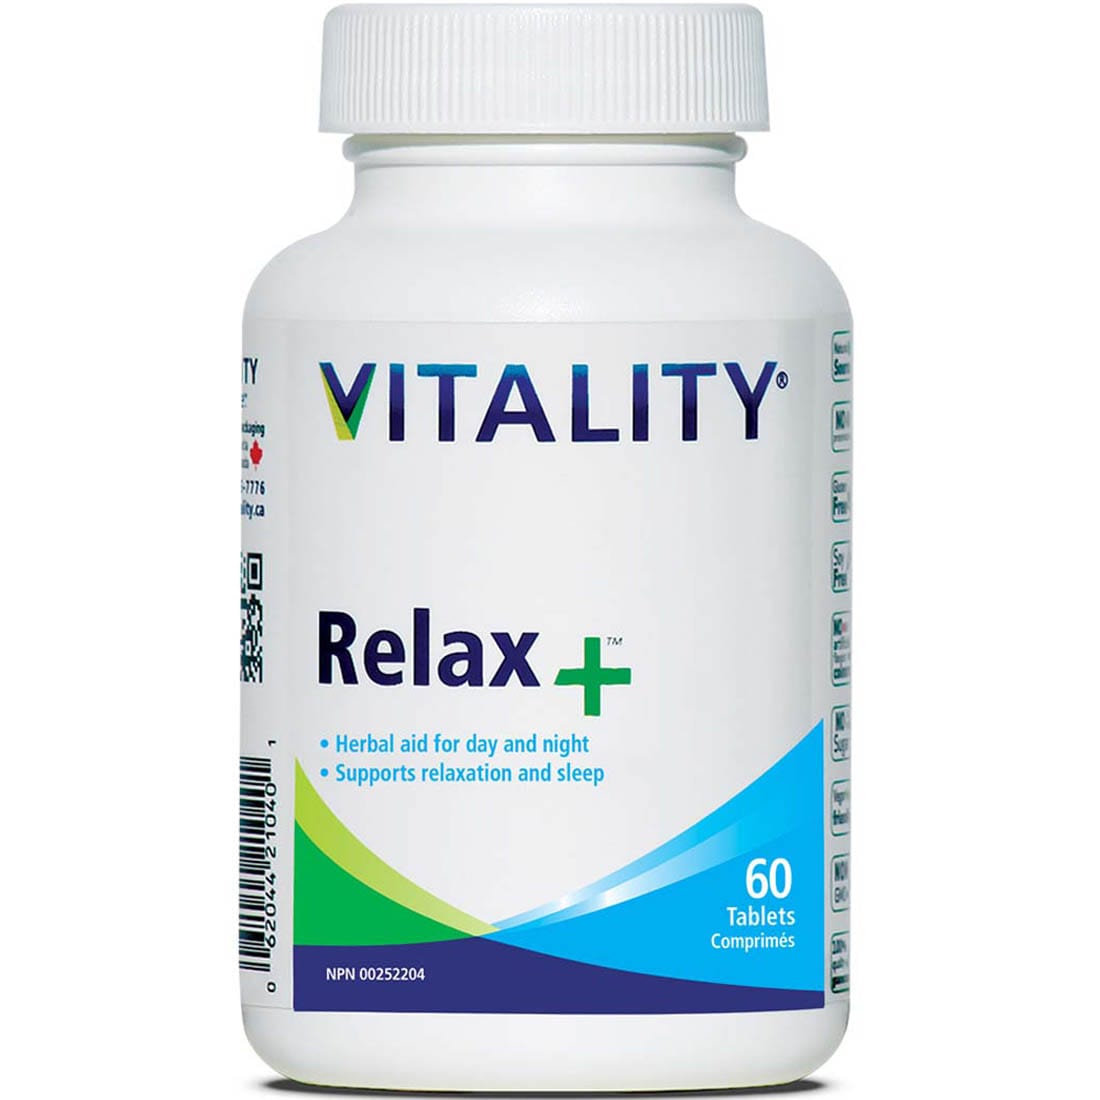 Vitality Relax Plus, 60 Tablets